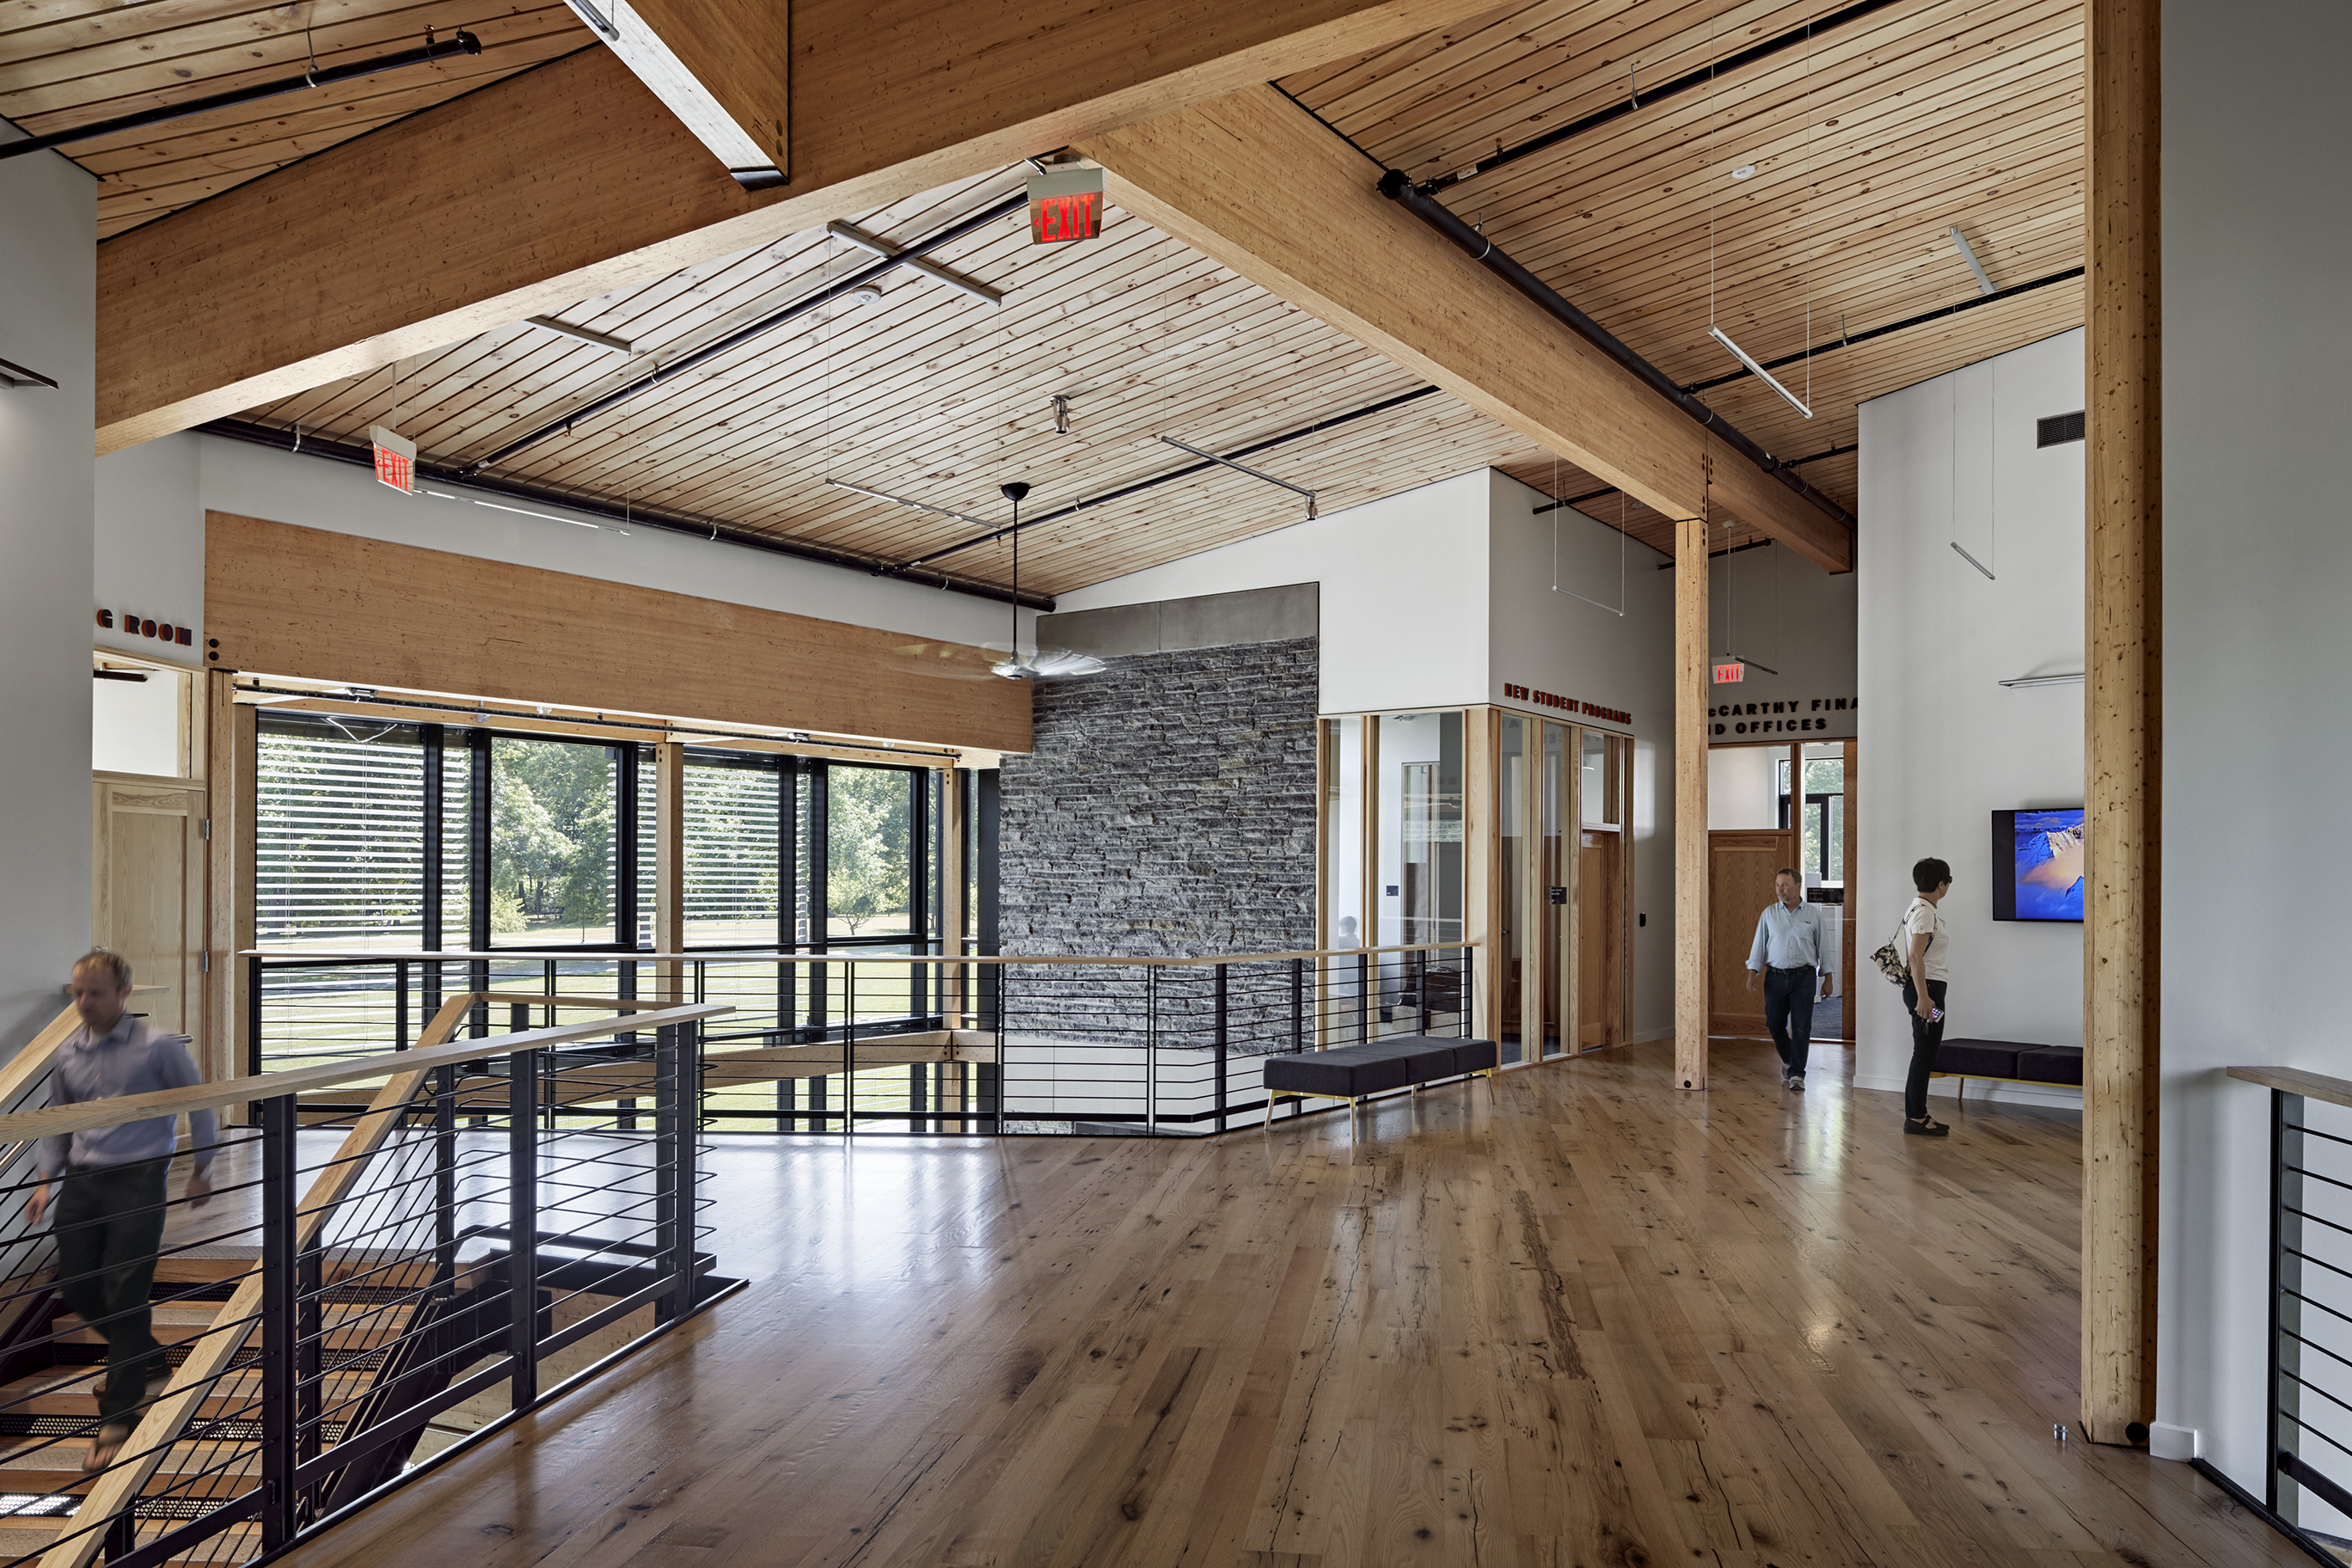 Wood and natural light on the second floor of the R.W. Kern Center.